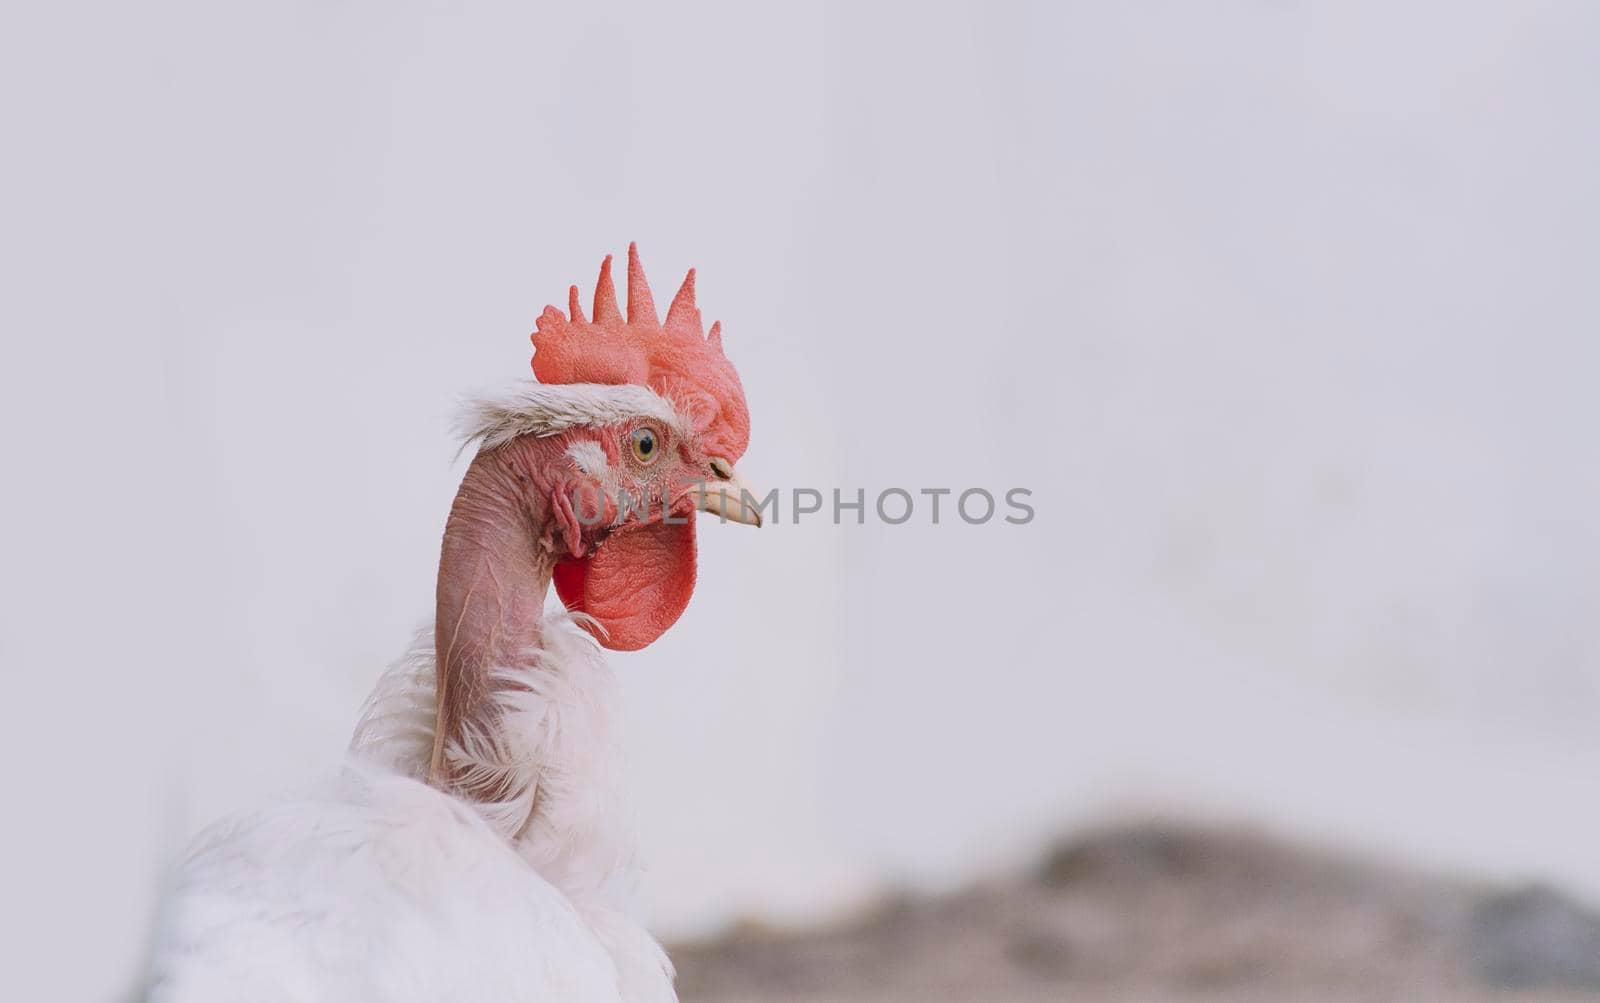 Crest of a pyroco rooster, close up of an Indian rooster, portrait of a pyroco rooster with a crest, concept of domestic animals.